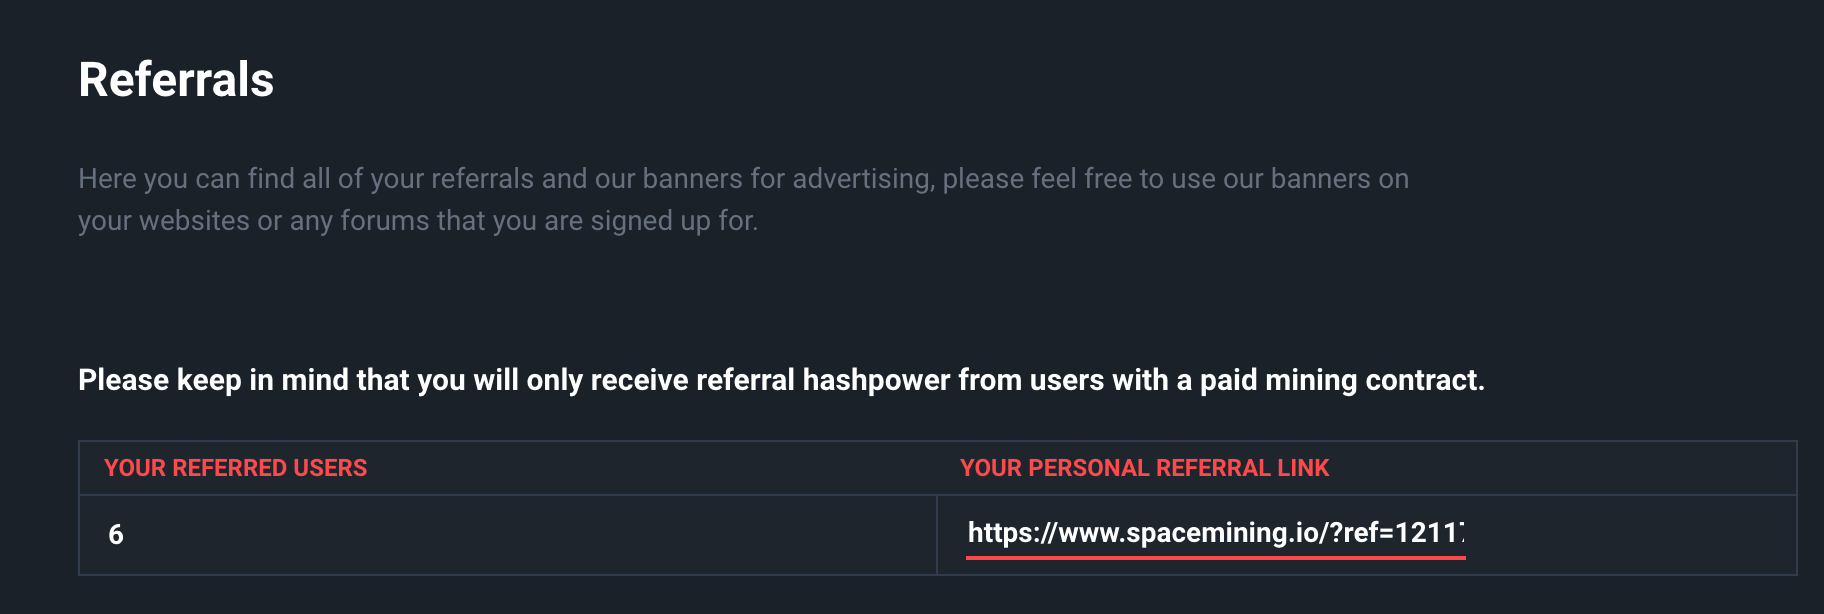 Spacemining.io Referrals.png